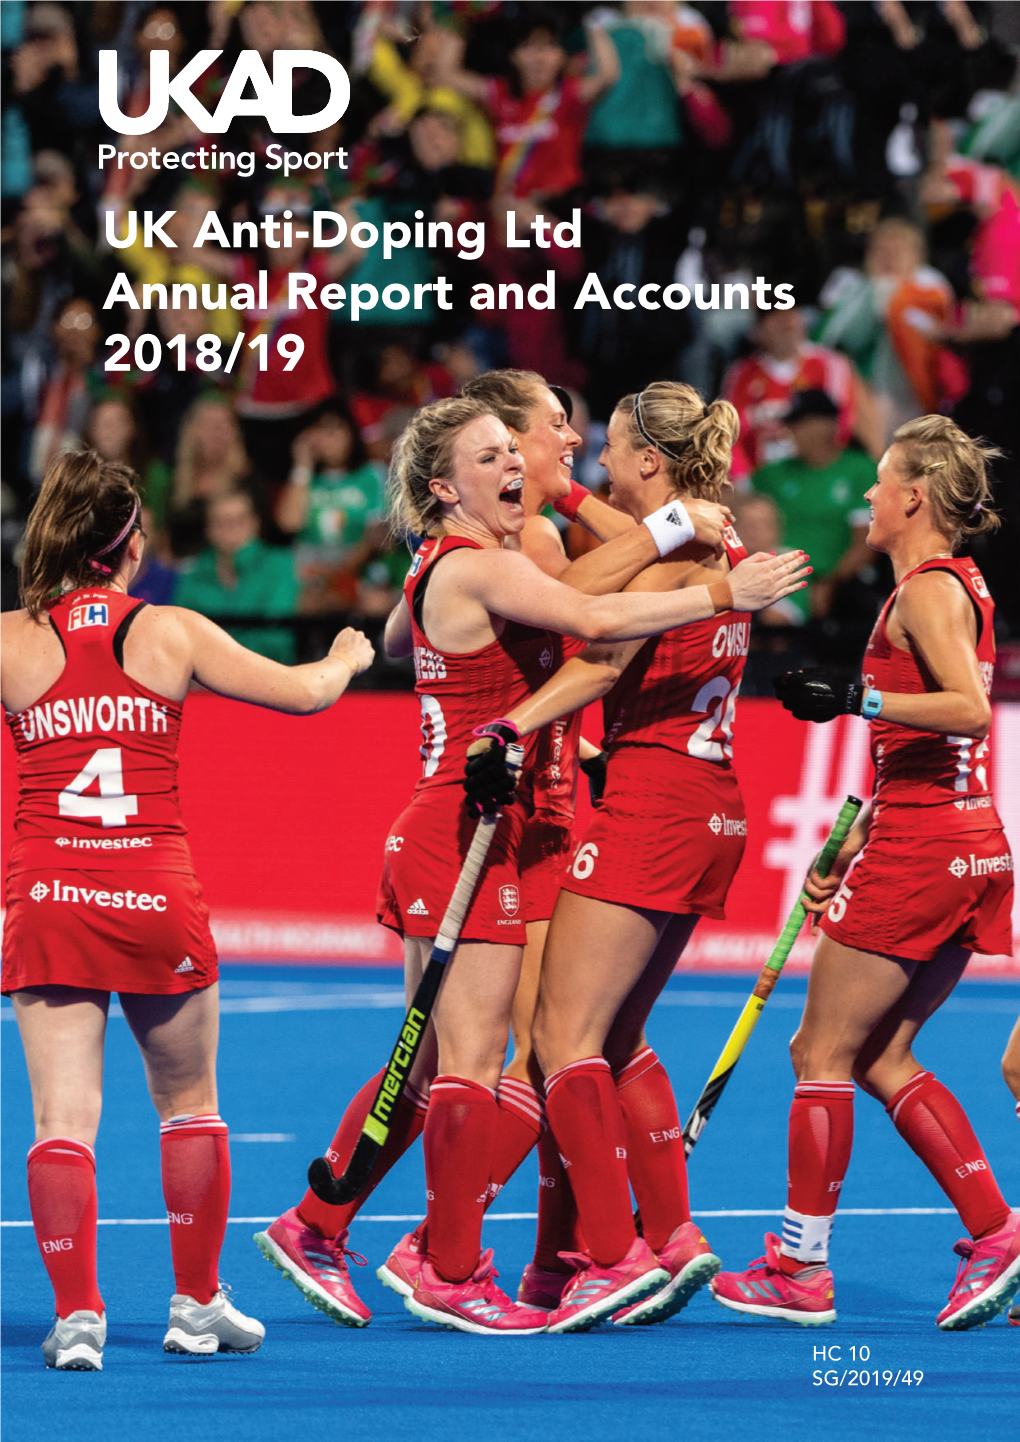 UK Anti-Doping Ltd Annual Report and Accounts 2018/19